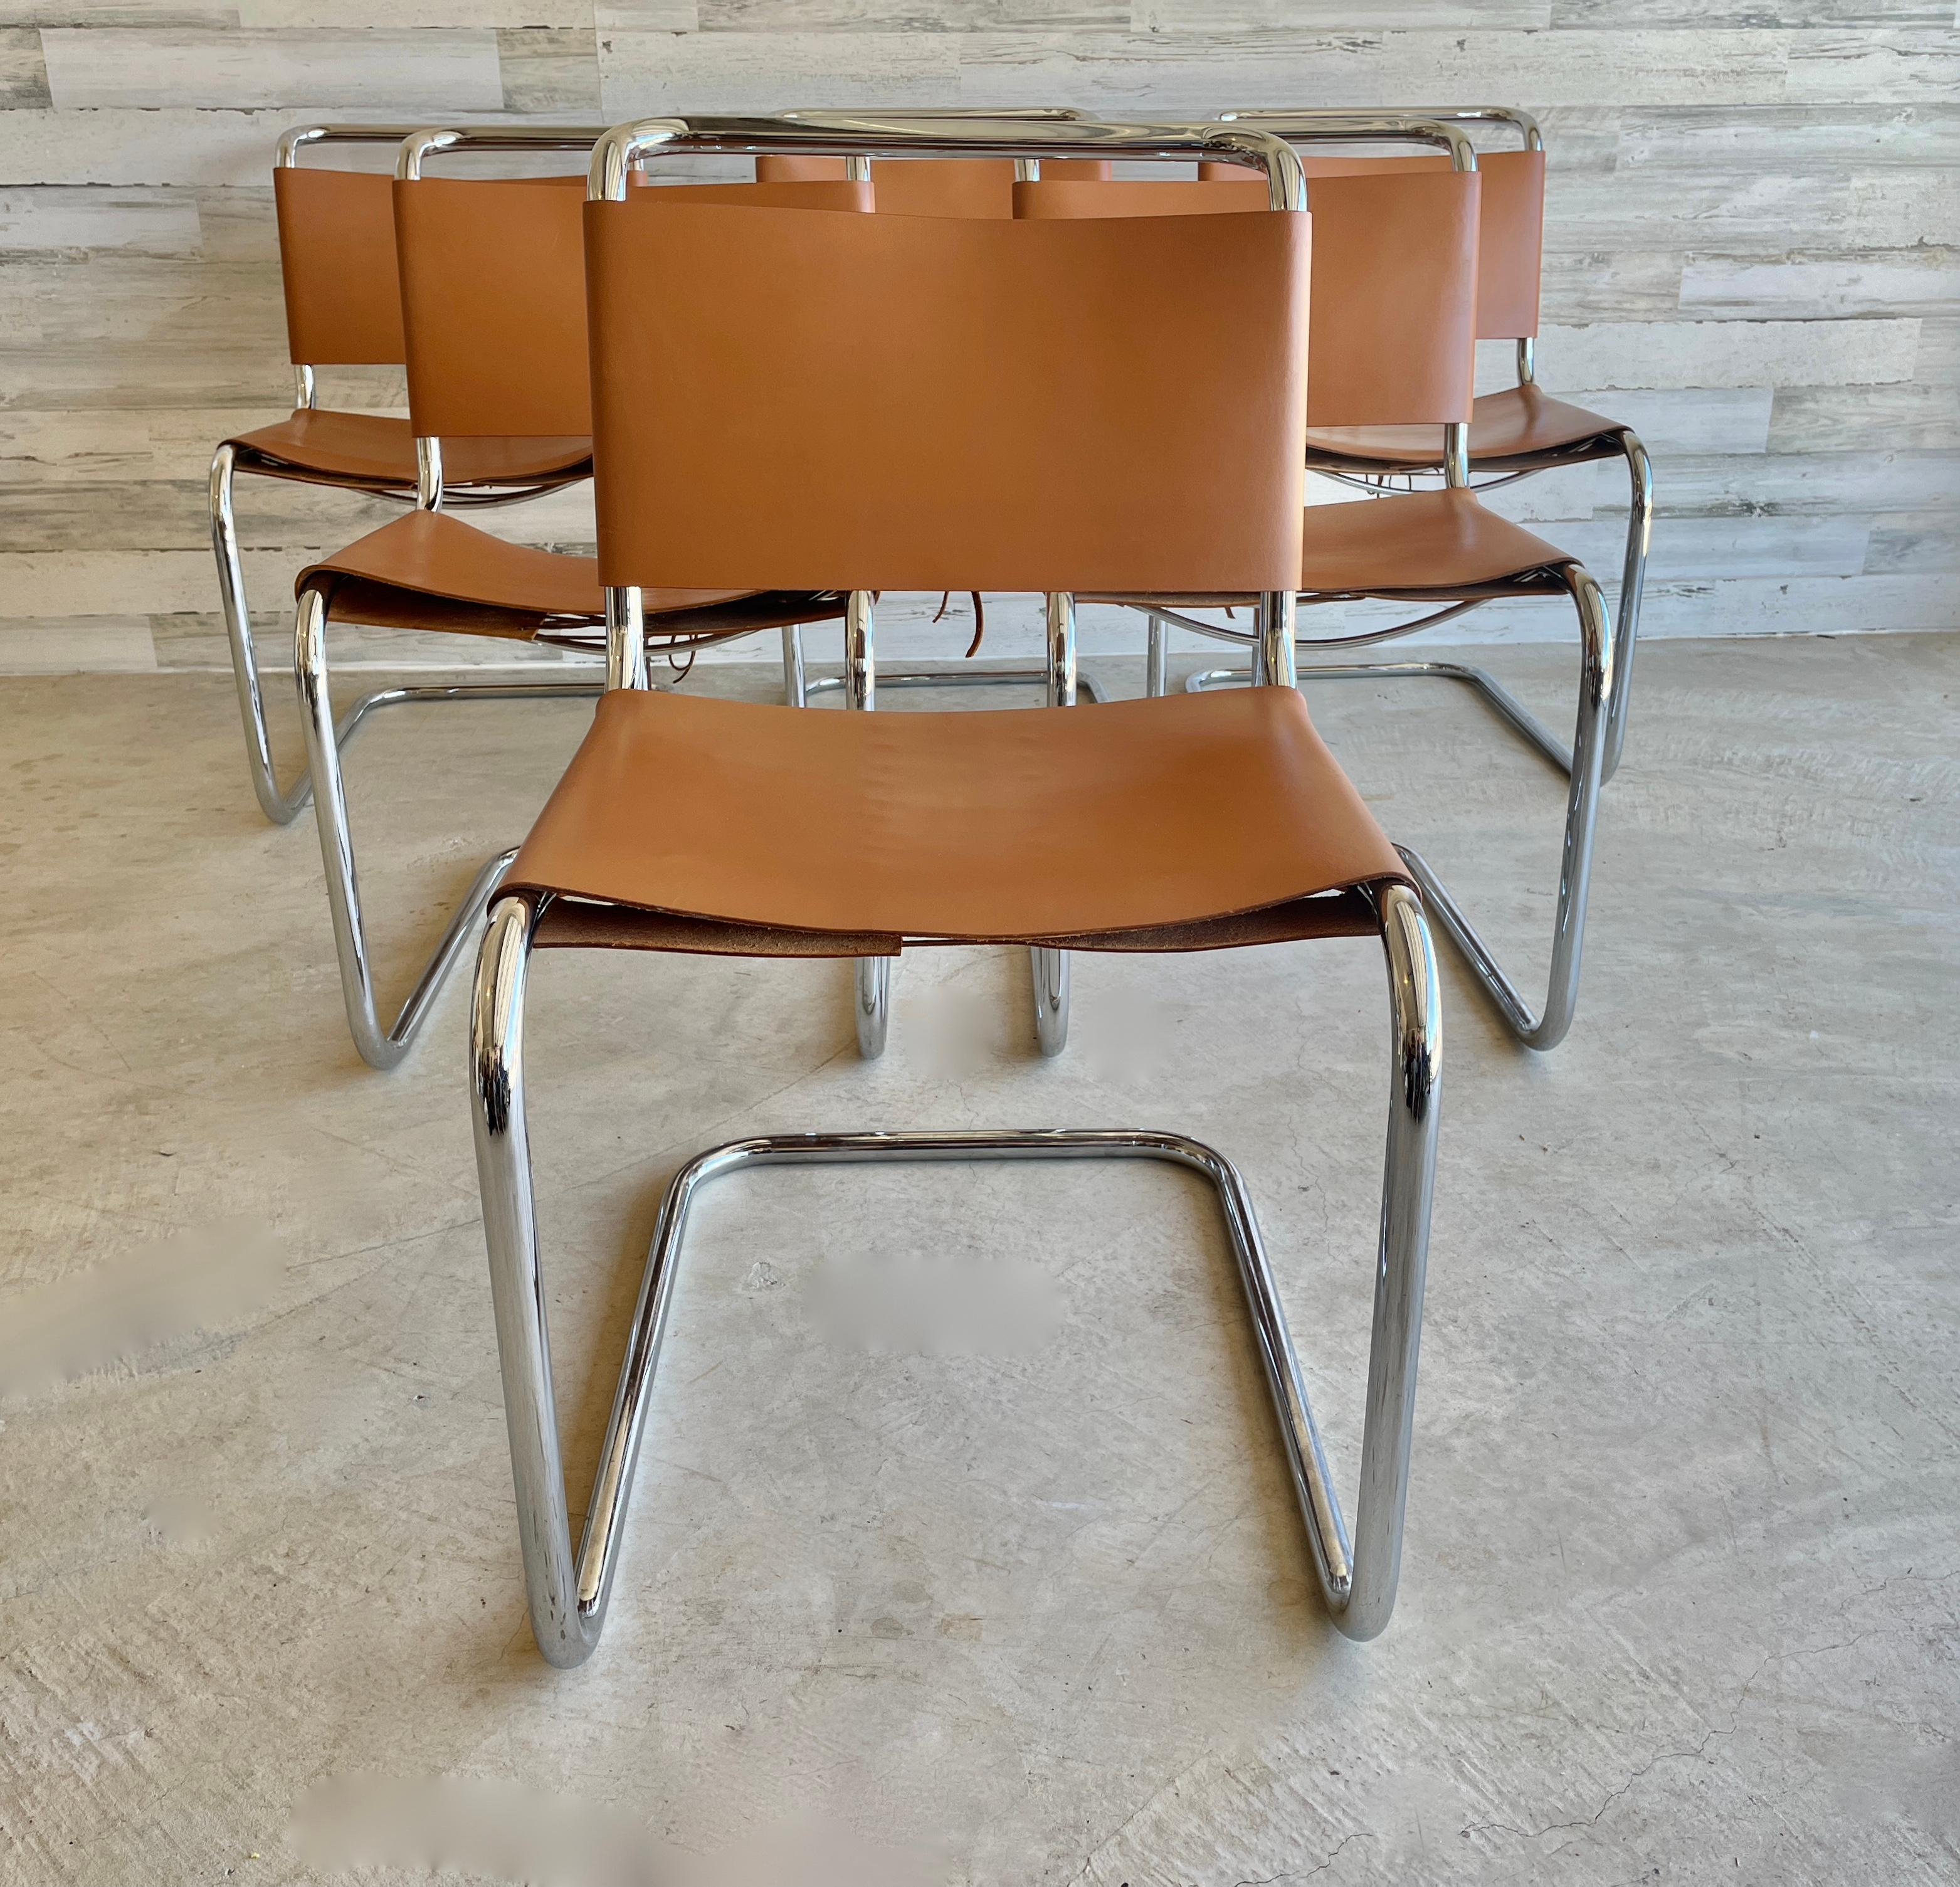 Spoleto dining chairs attributed to Knoll. Cognac colored leather and Kodiak laces on a chrome cantilever frame.